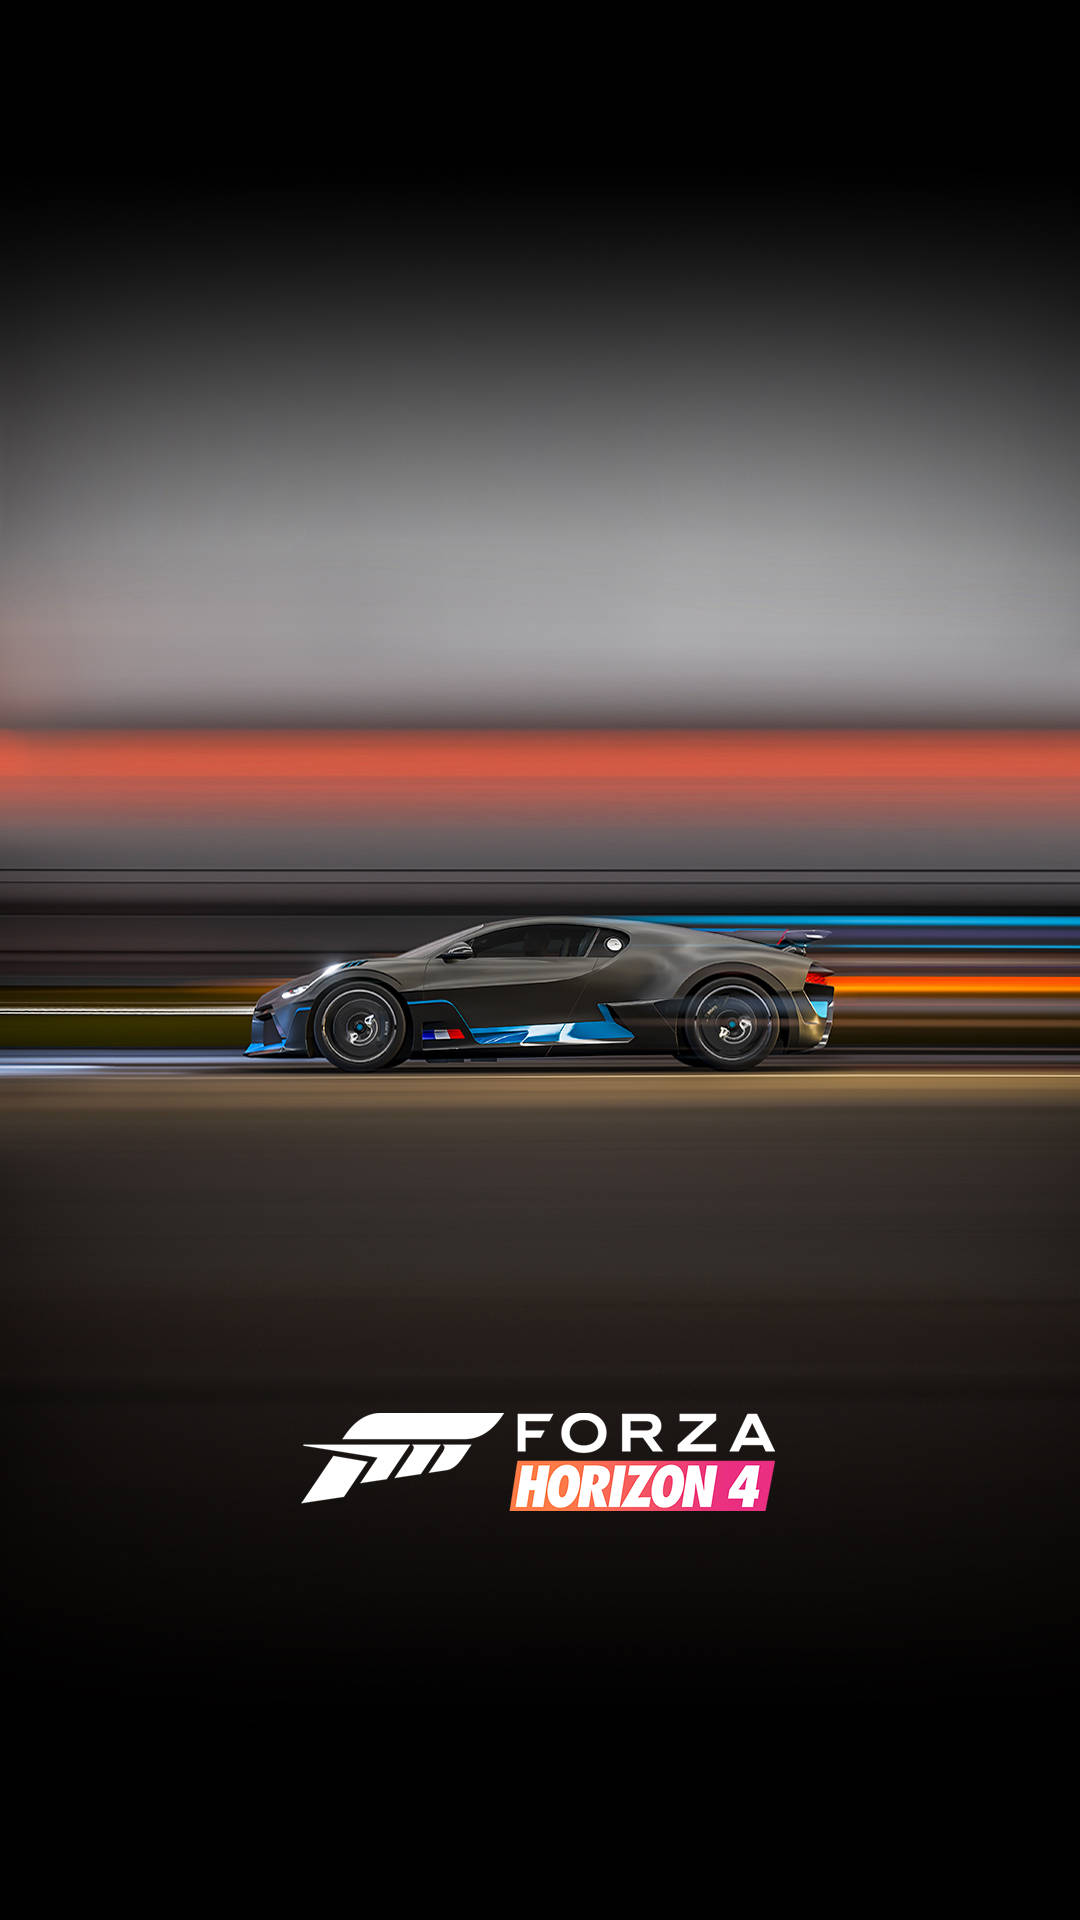 Captivating Forza Racing Game Iphone Wallpaper Background